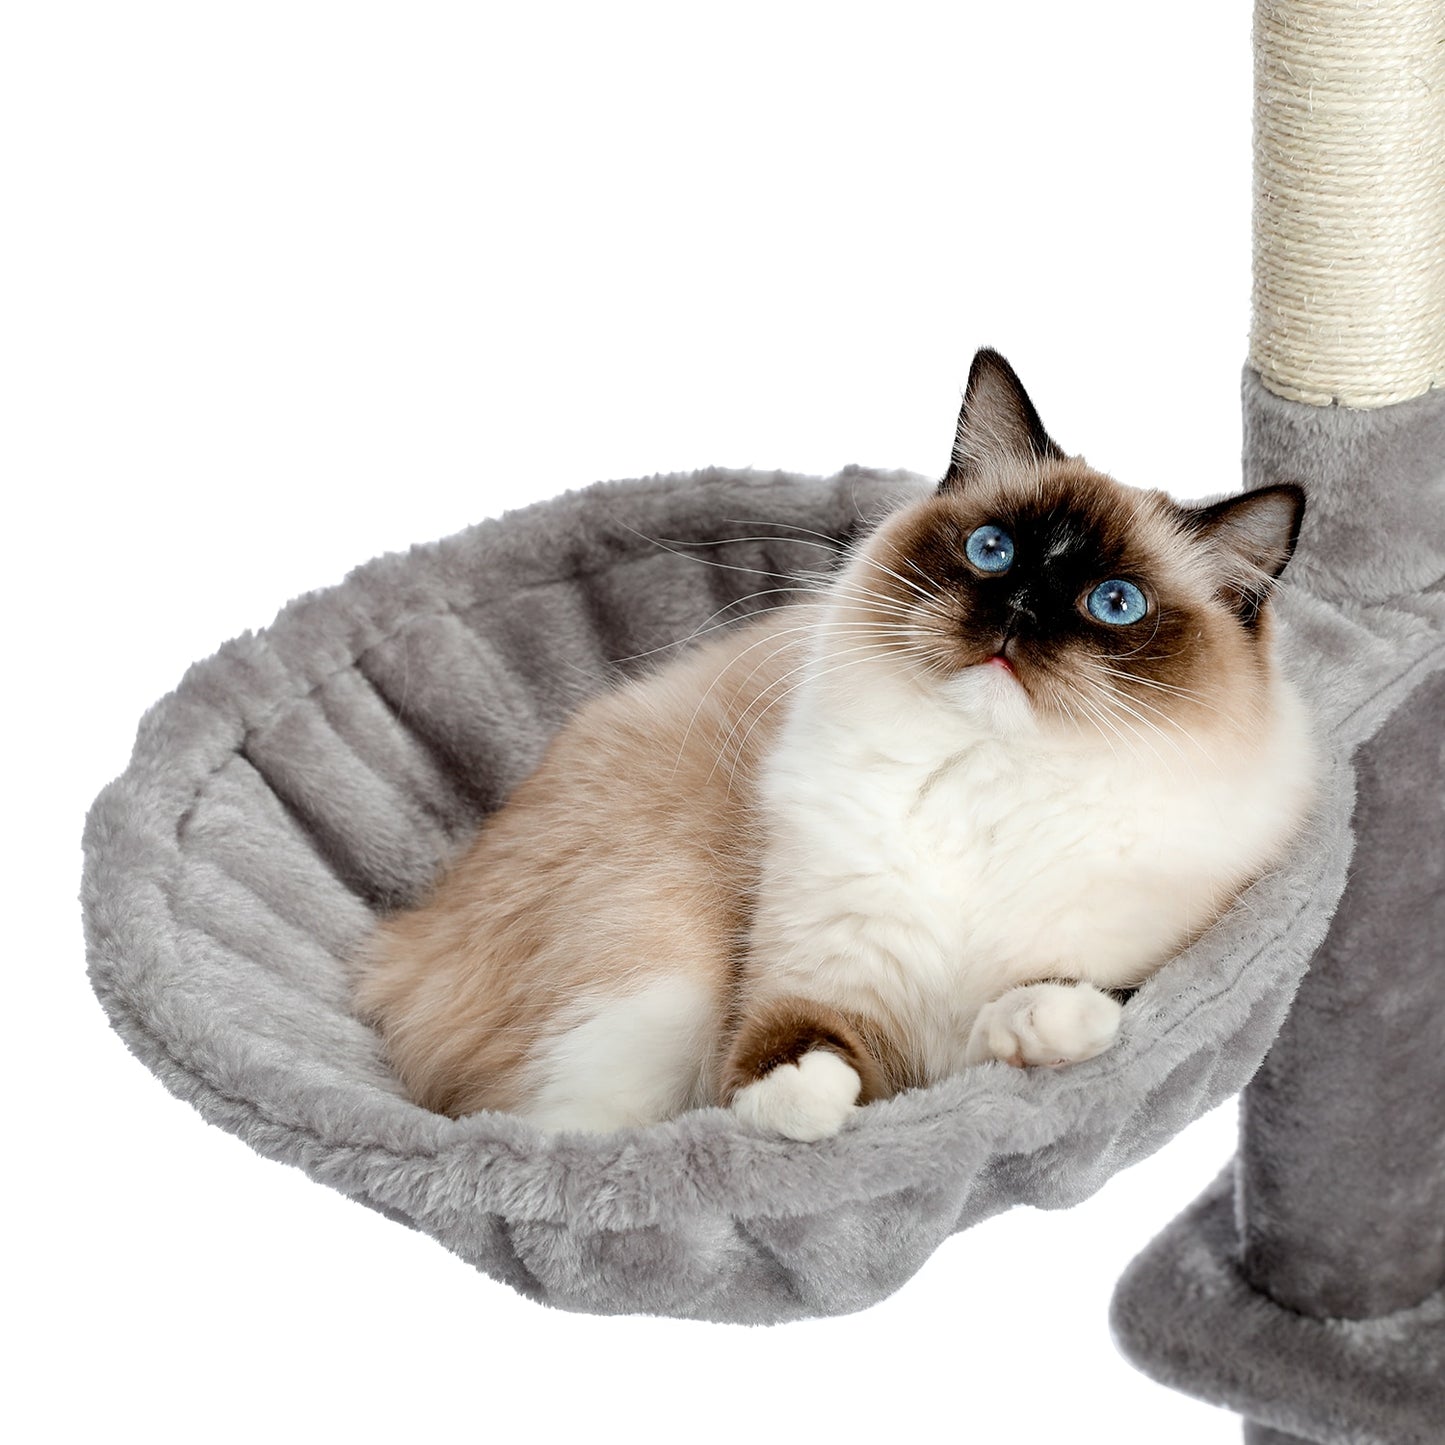 Cat Tree Tower/Post, Multi-Level Pet Climbing Tree with Hammock With Toy Ball